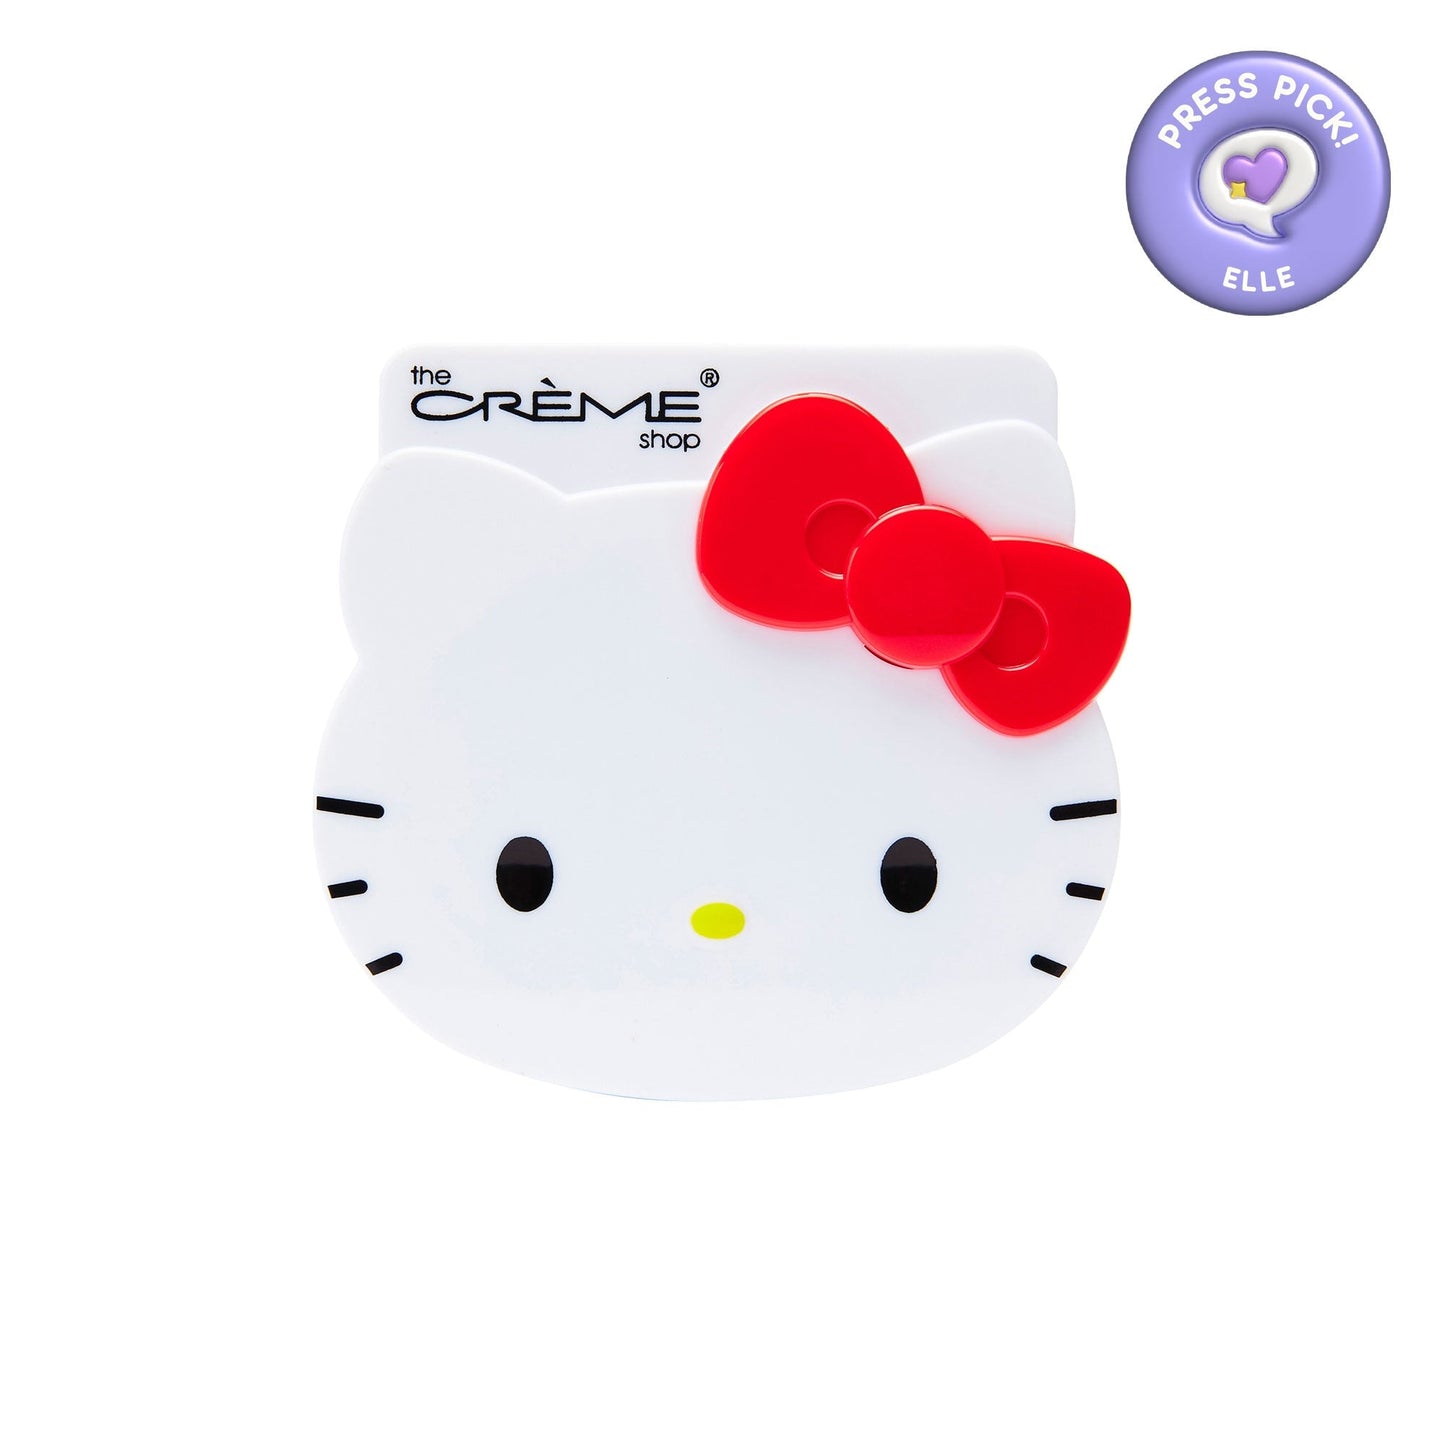 Hello Kitty Mattifying Blotting Paper + Reusable Mirror Compact (Limited Edition) Blotting Paper The Crème Shop x Sanrio 